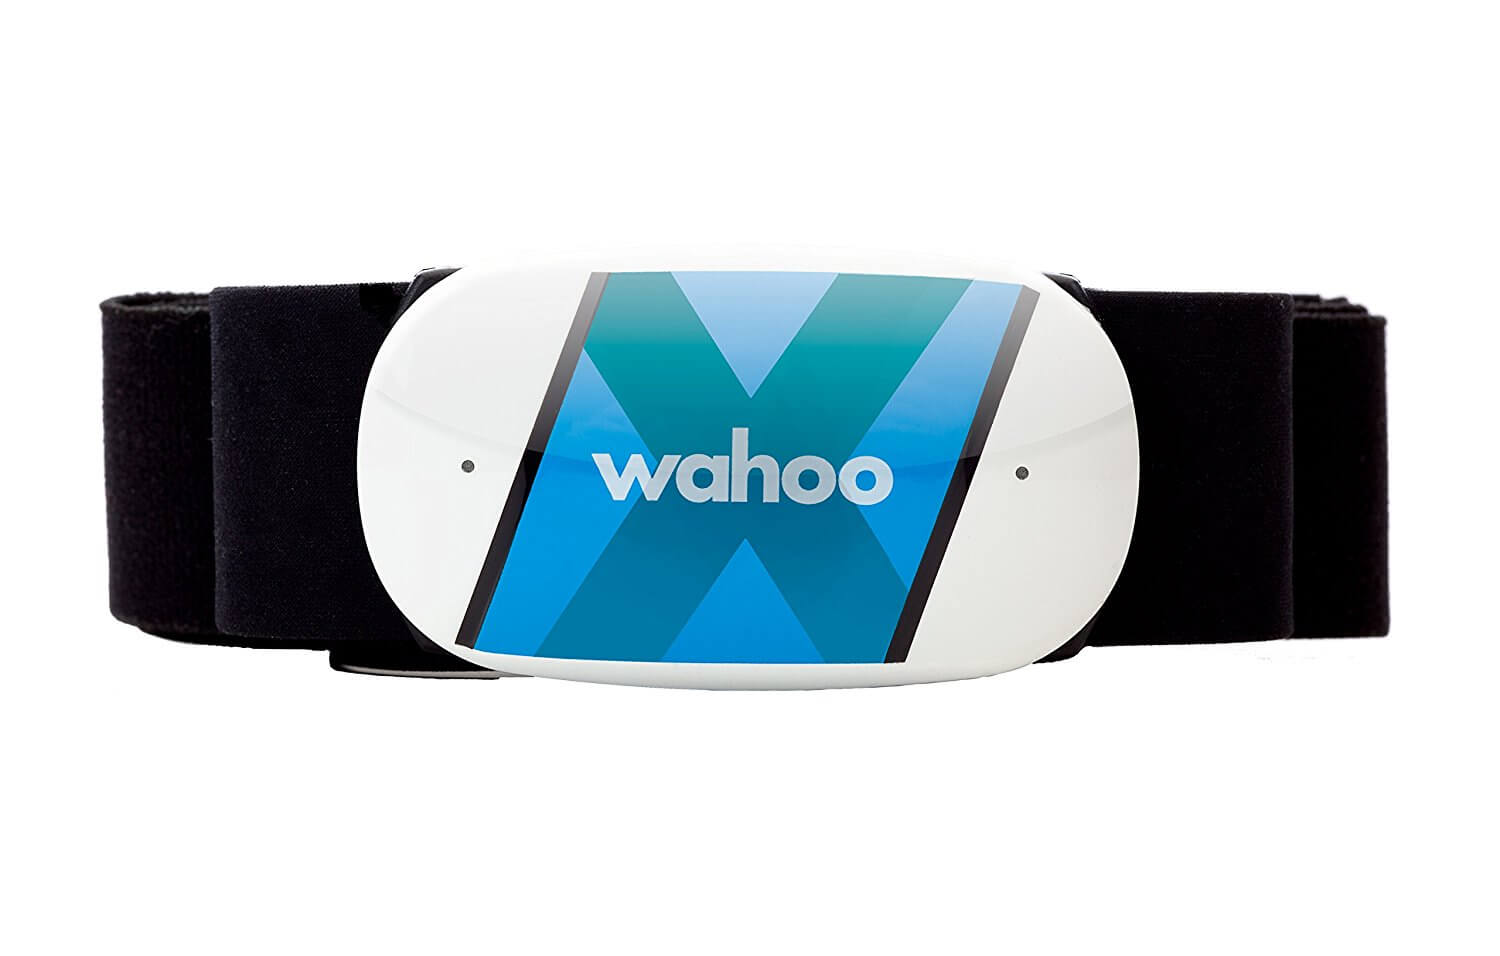 iphone heart rate monitor - wahoo trickr x